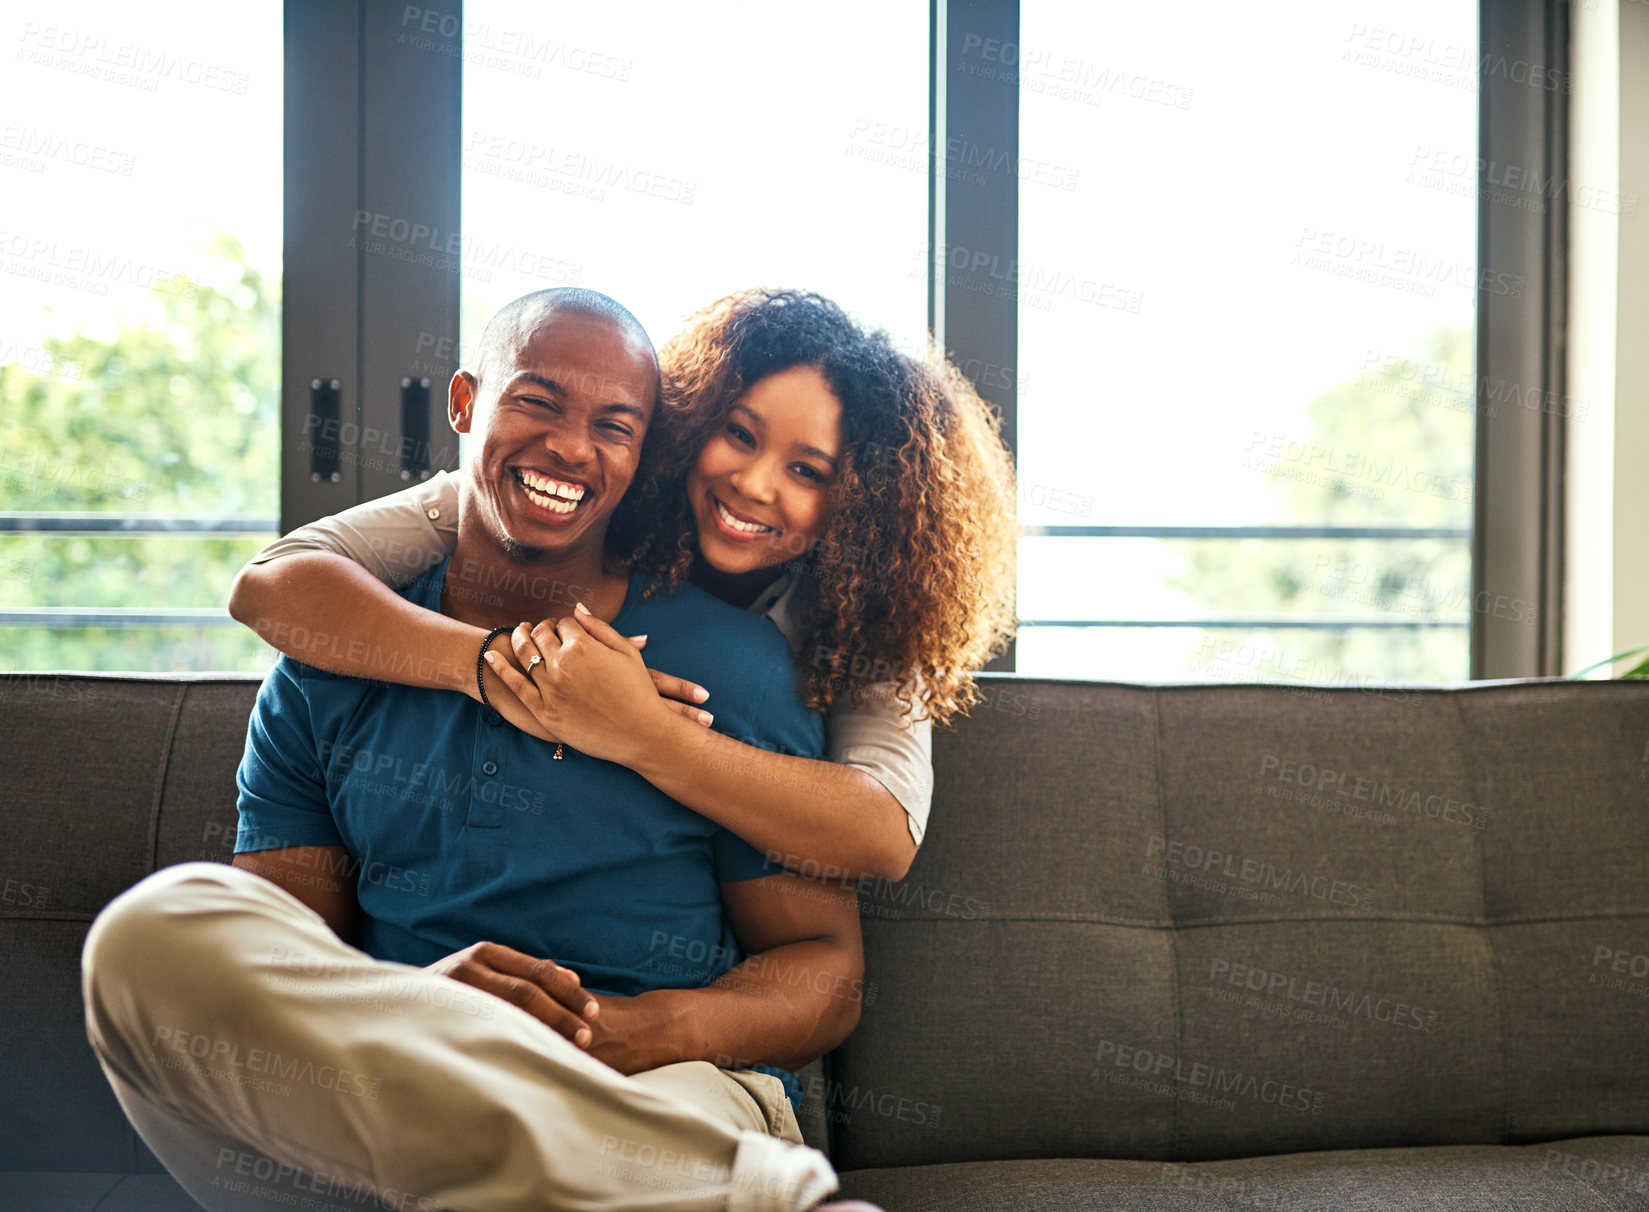 Buy stock photo Portrait of a happy young couple relaxing together at home